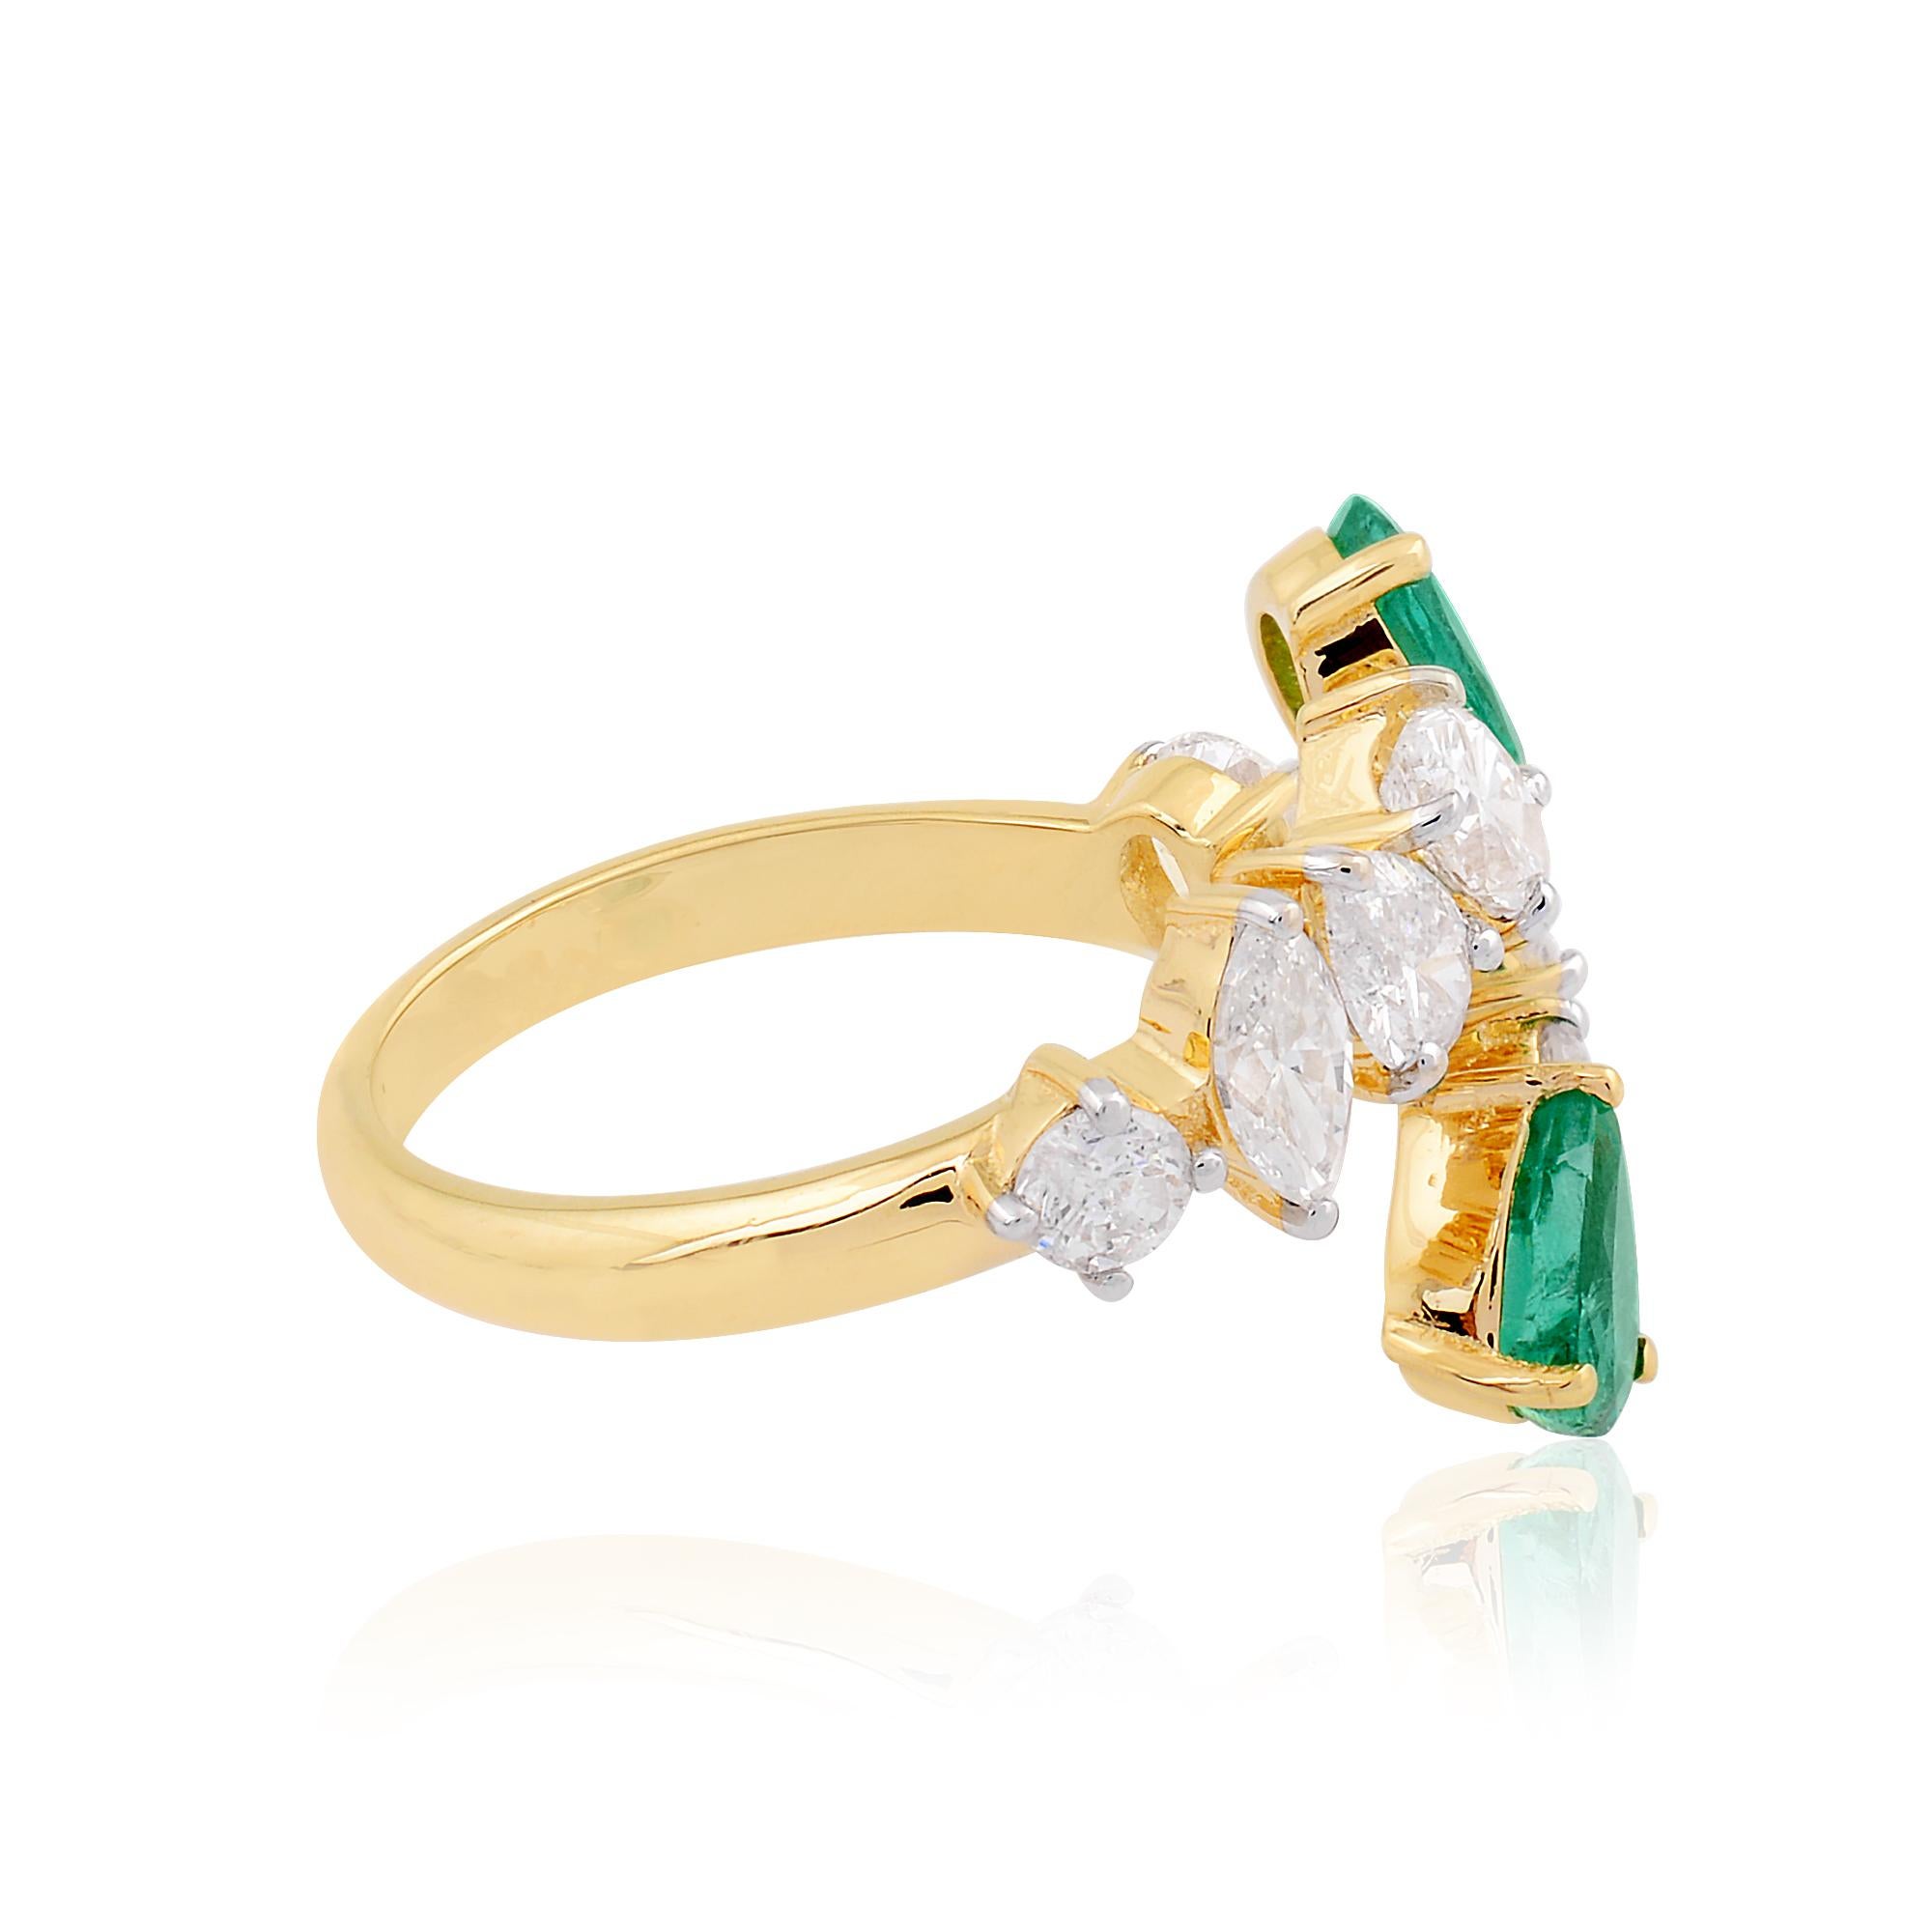 Item Code :- SER-2302F
Gross Wt :- 3.36 gm
14k Yellow Gold Wt :- 2.92 gm
Diamond Wt :- 1.50 ct ( SI Clarity & HI Color )
Emerald Wt :- 0.72 ct
Ring Size :- 7 US & All size available
✦ Sizing
.....................
We can adjust most items to fit your